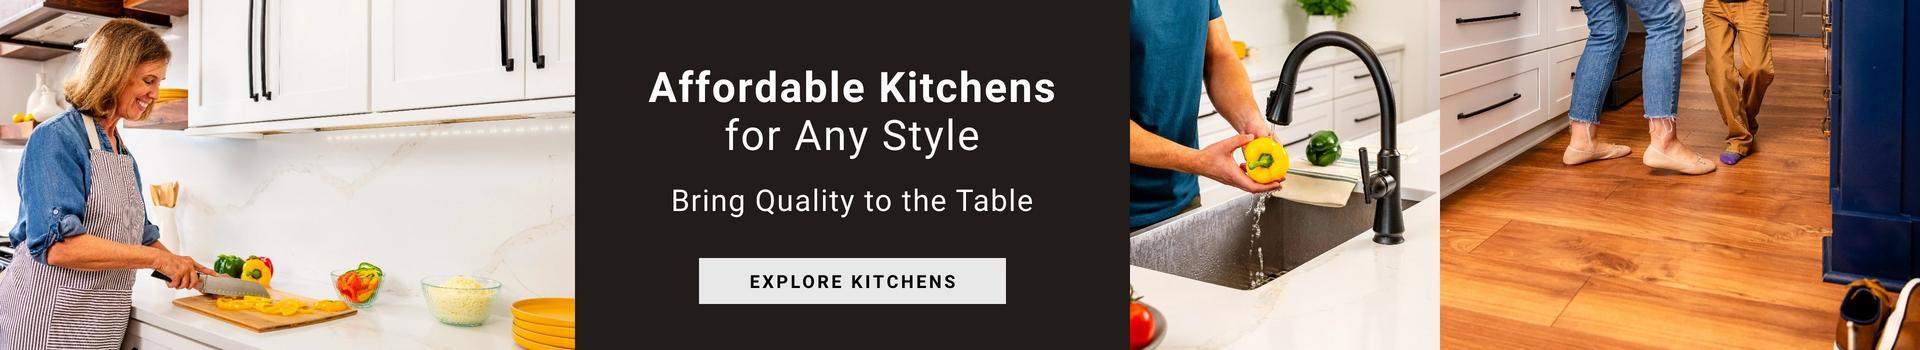 Affordable Kitchens for Any Style. Bring quality to the table.